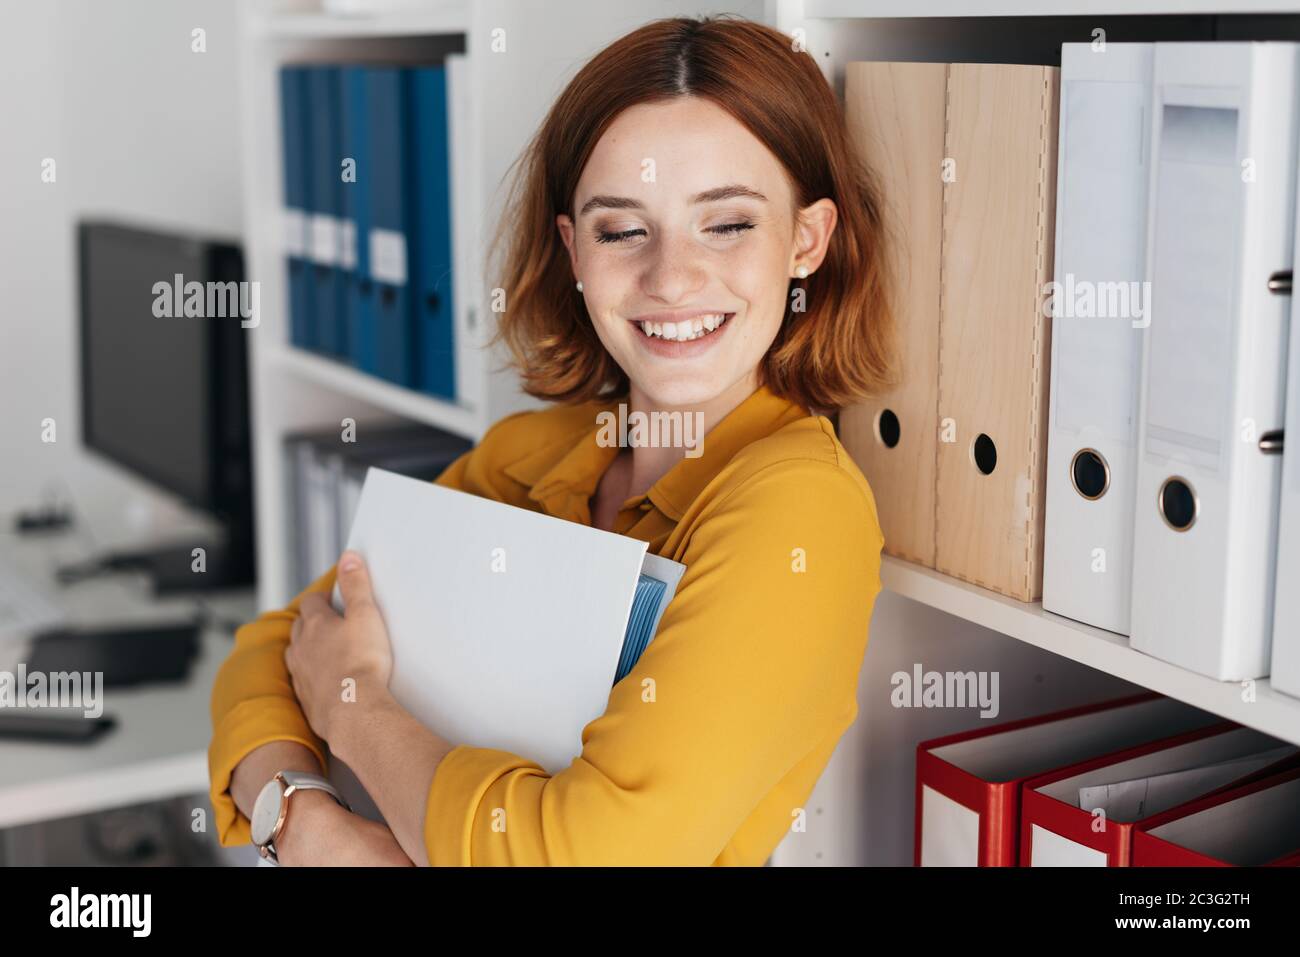 Young businesswoman with a wide smile standing clutching a large binder to her chest in the office with downcast eyes Stock Photo